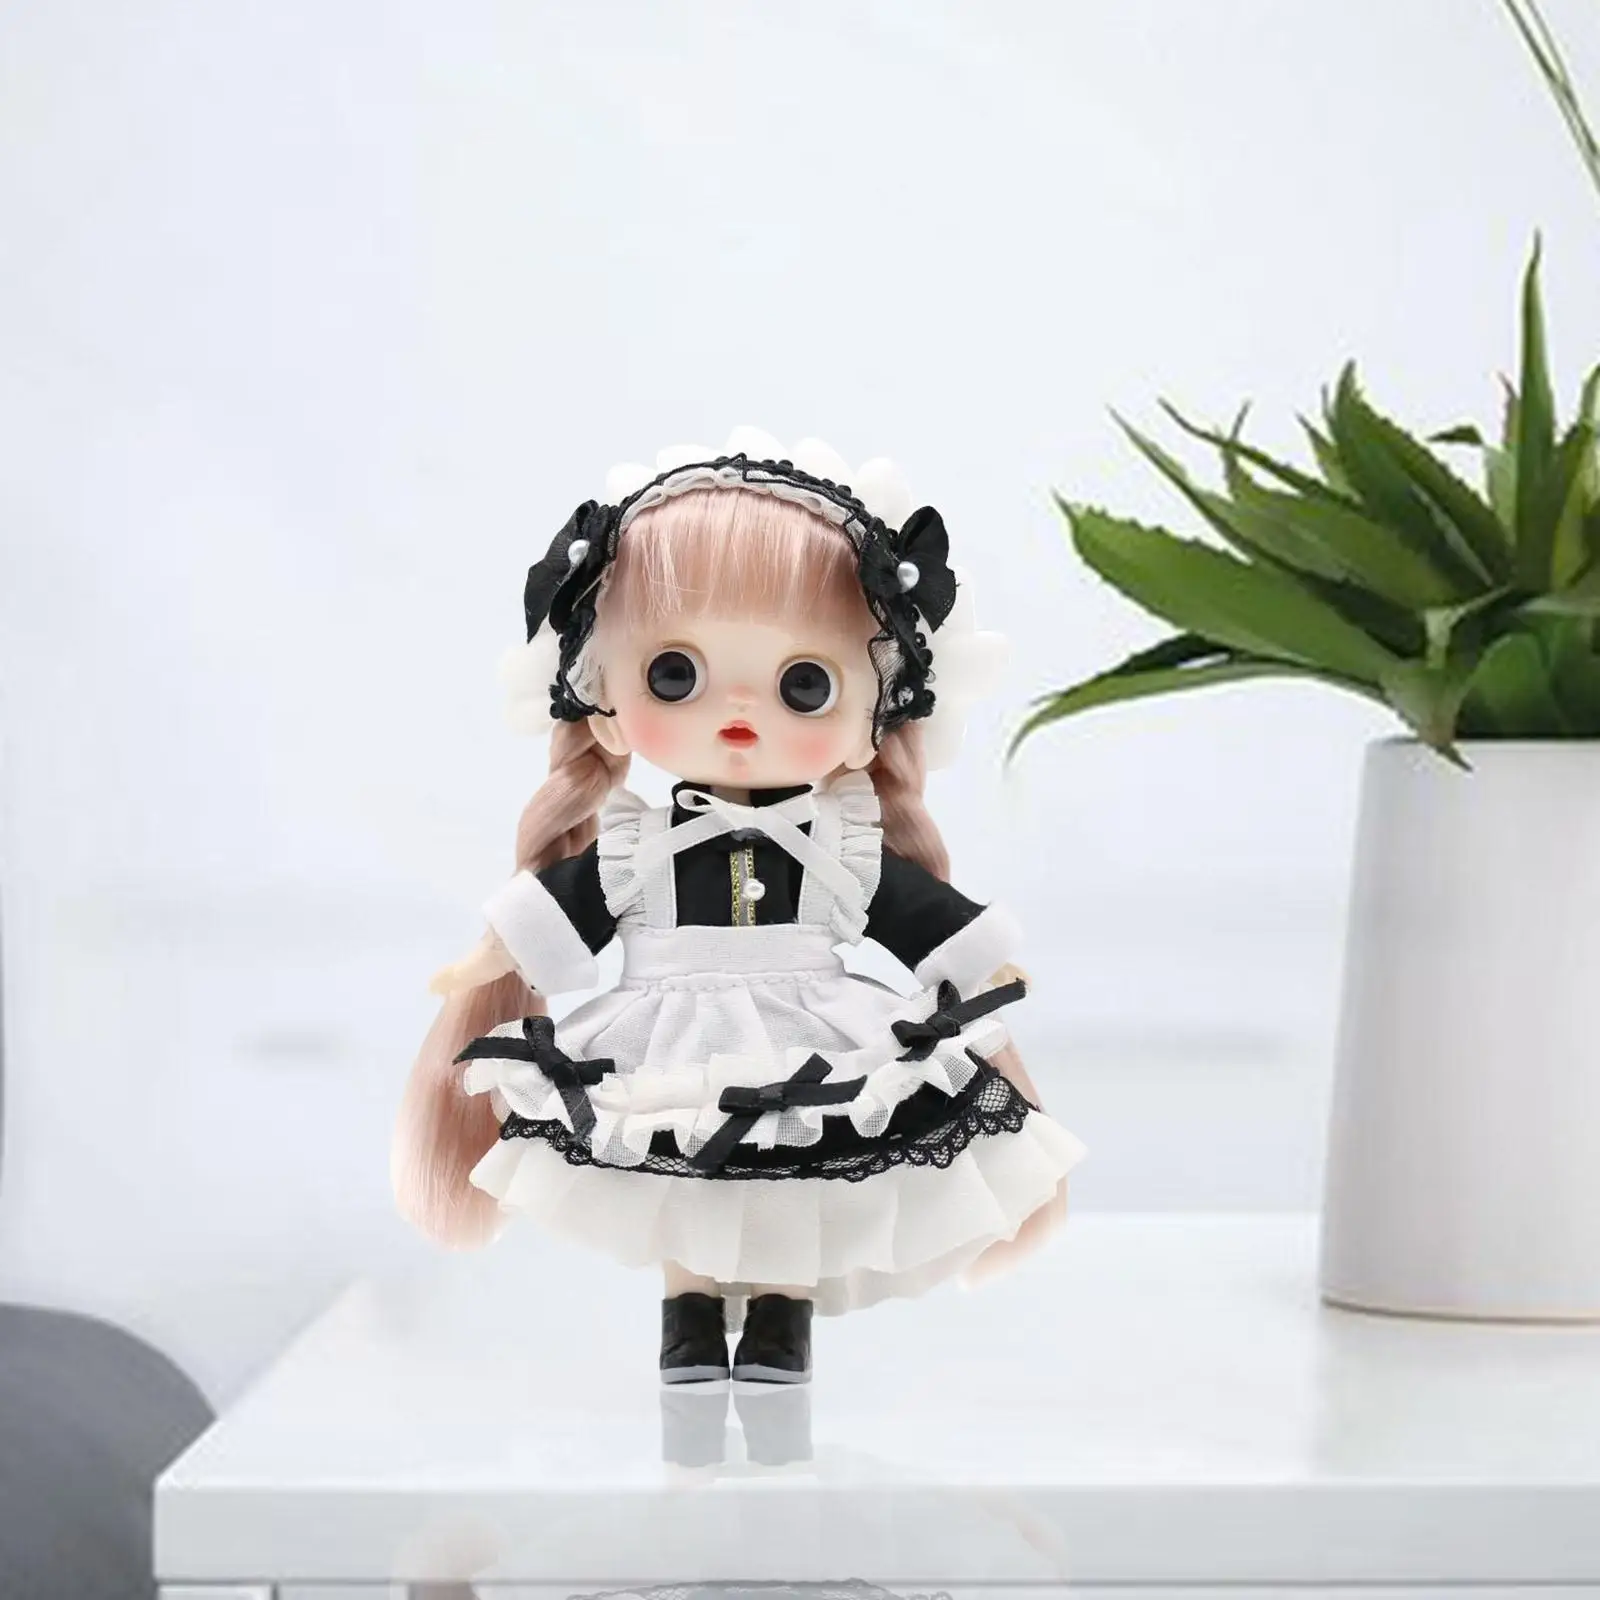 Ball Jointed Baby Doll Kids Girls Toys Makeup Doll Dress up Accessories Flexible Joint Doll Makeup Doll for Graduation Valentine